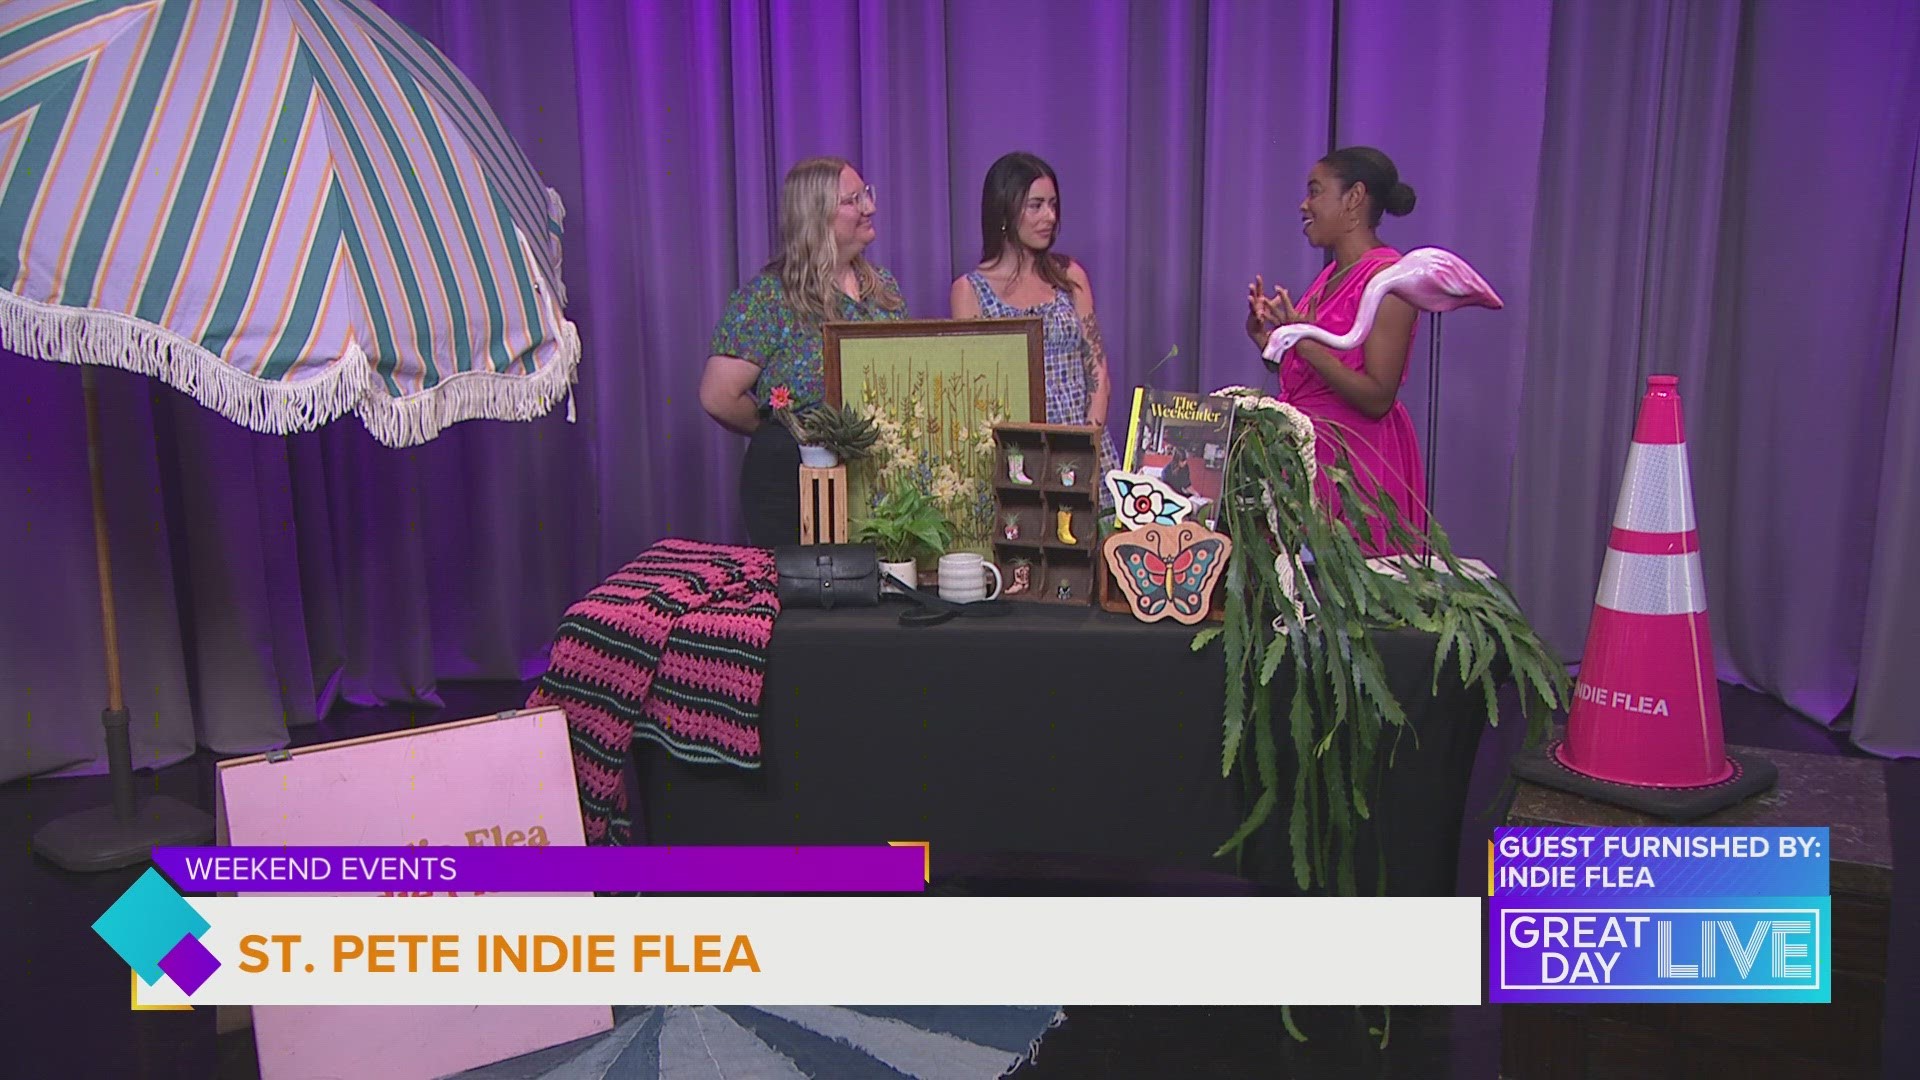 From hand-crafted goods to mid-century furniture, you can find it all at Indie Flea St. Pete April 7th at The Factory from 12-4pm. Visit theindieflea.com for more.